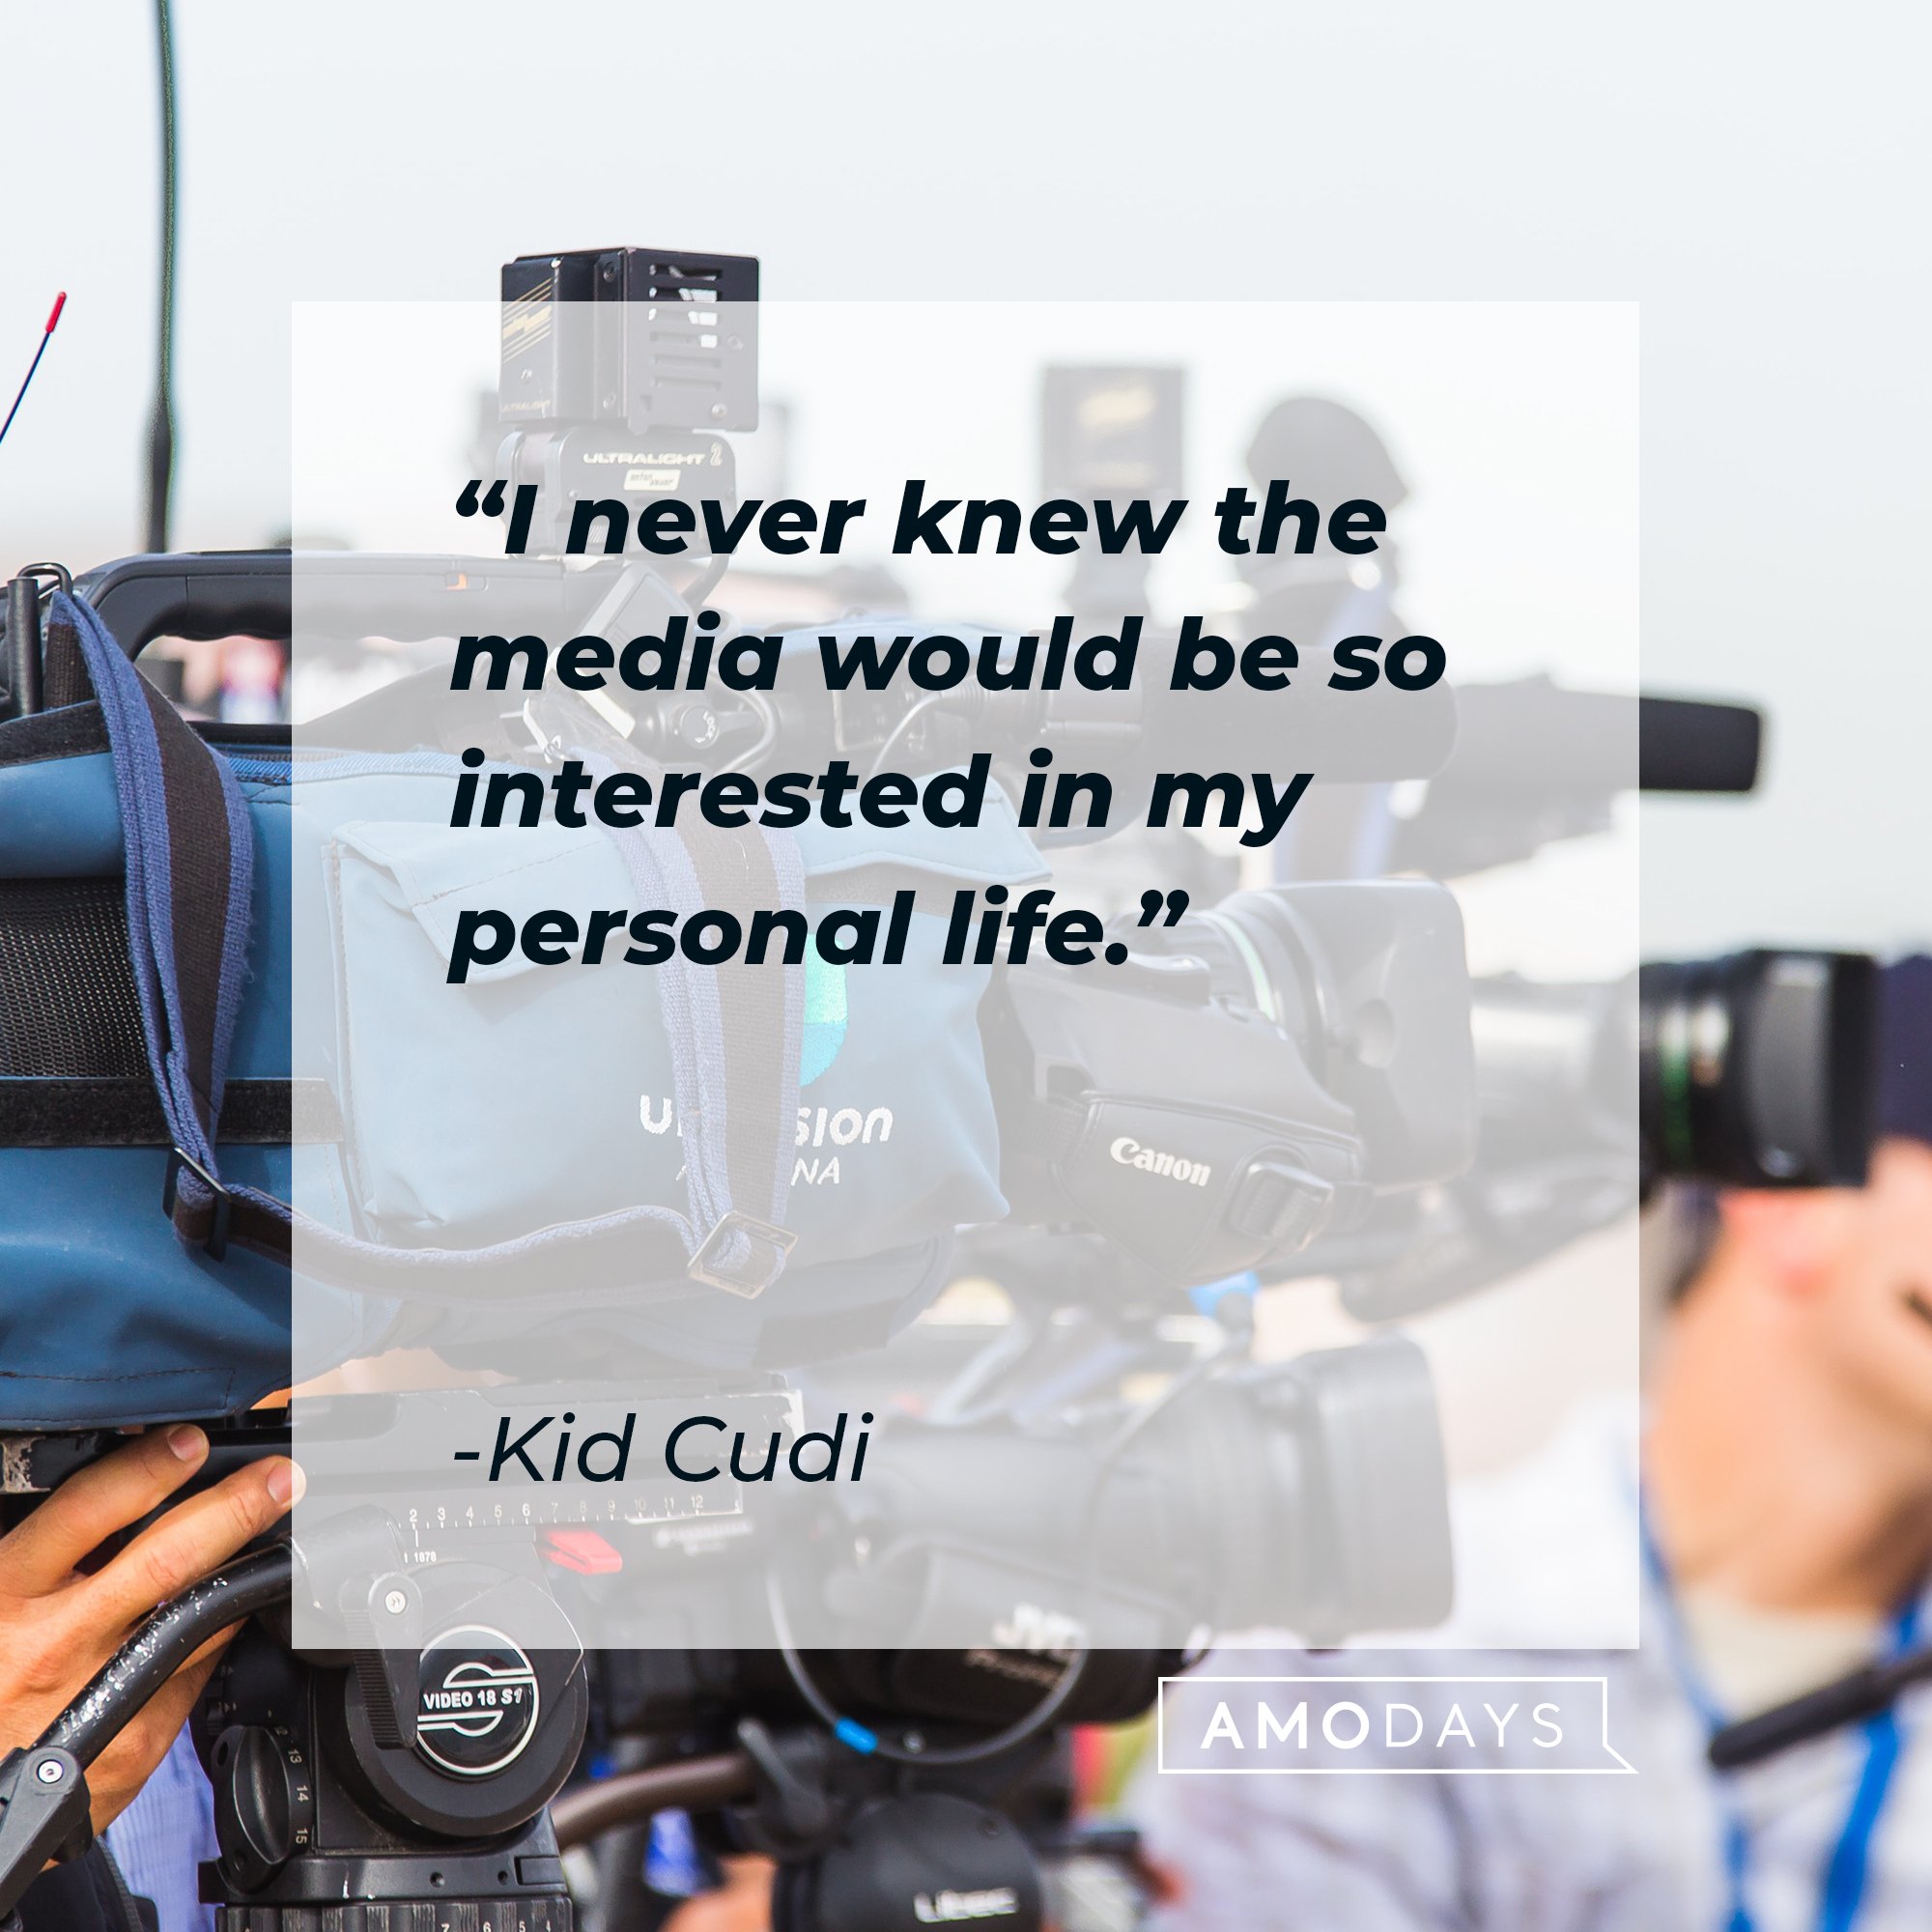 Kid Cudi’s quote: "I never knew the media would be so interested in my personal life." | Image: AmoDays 